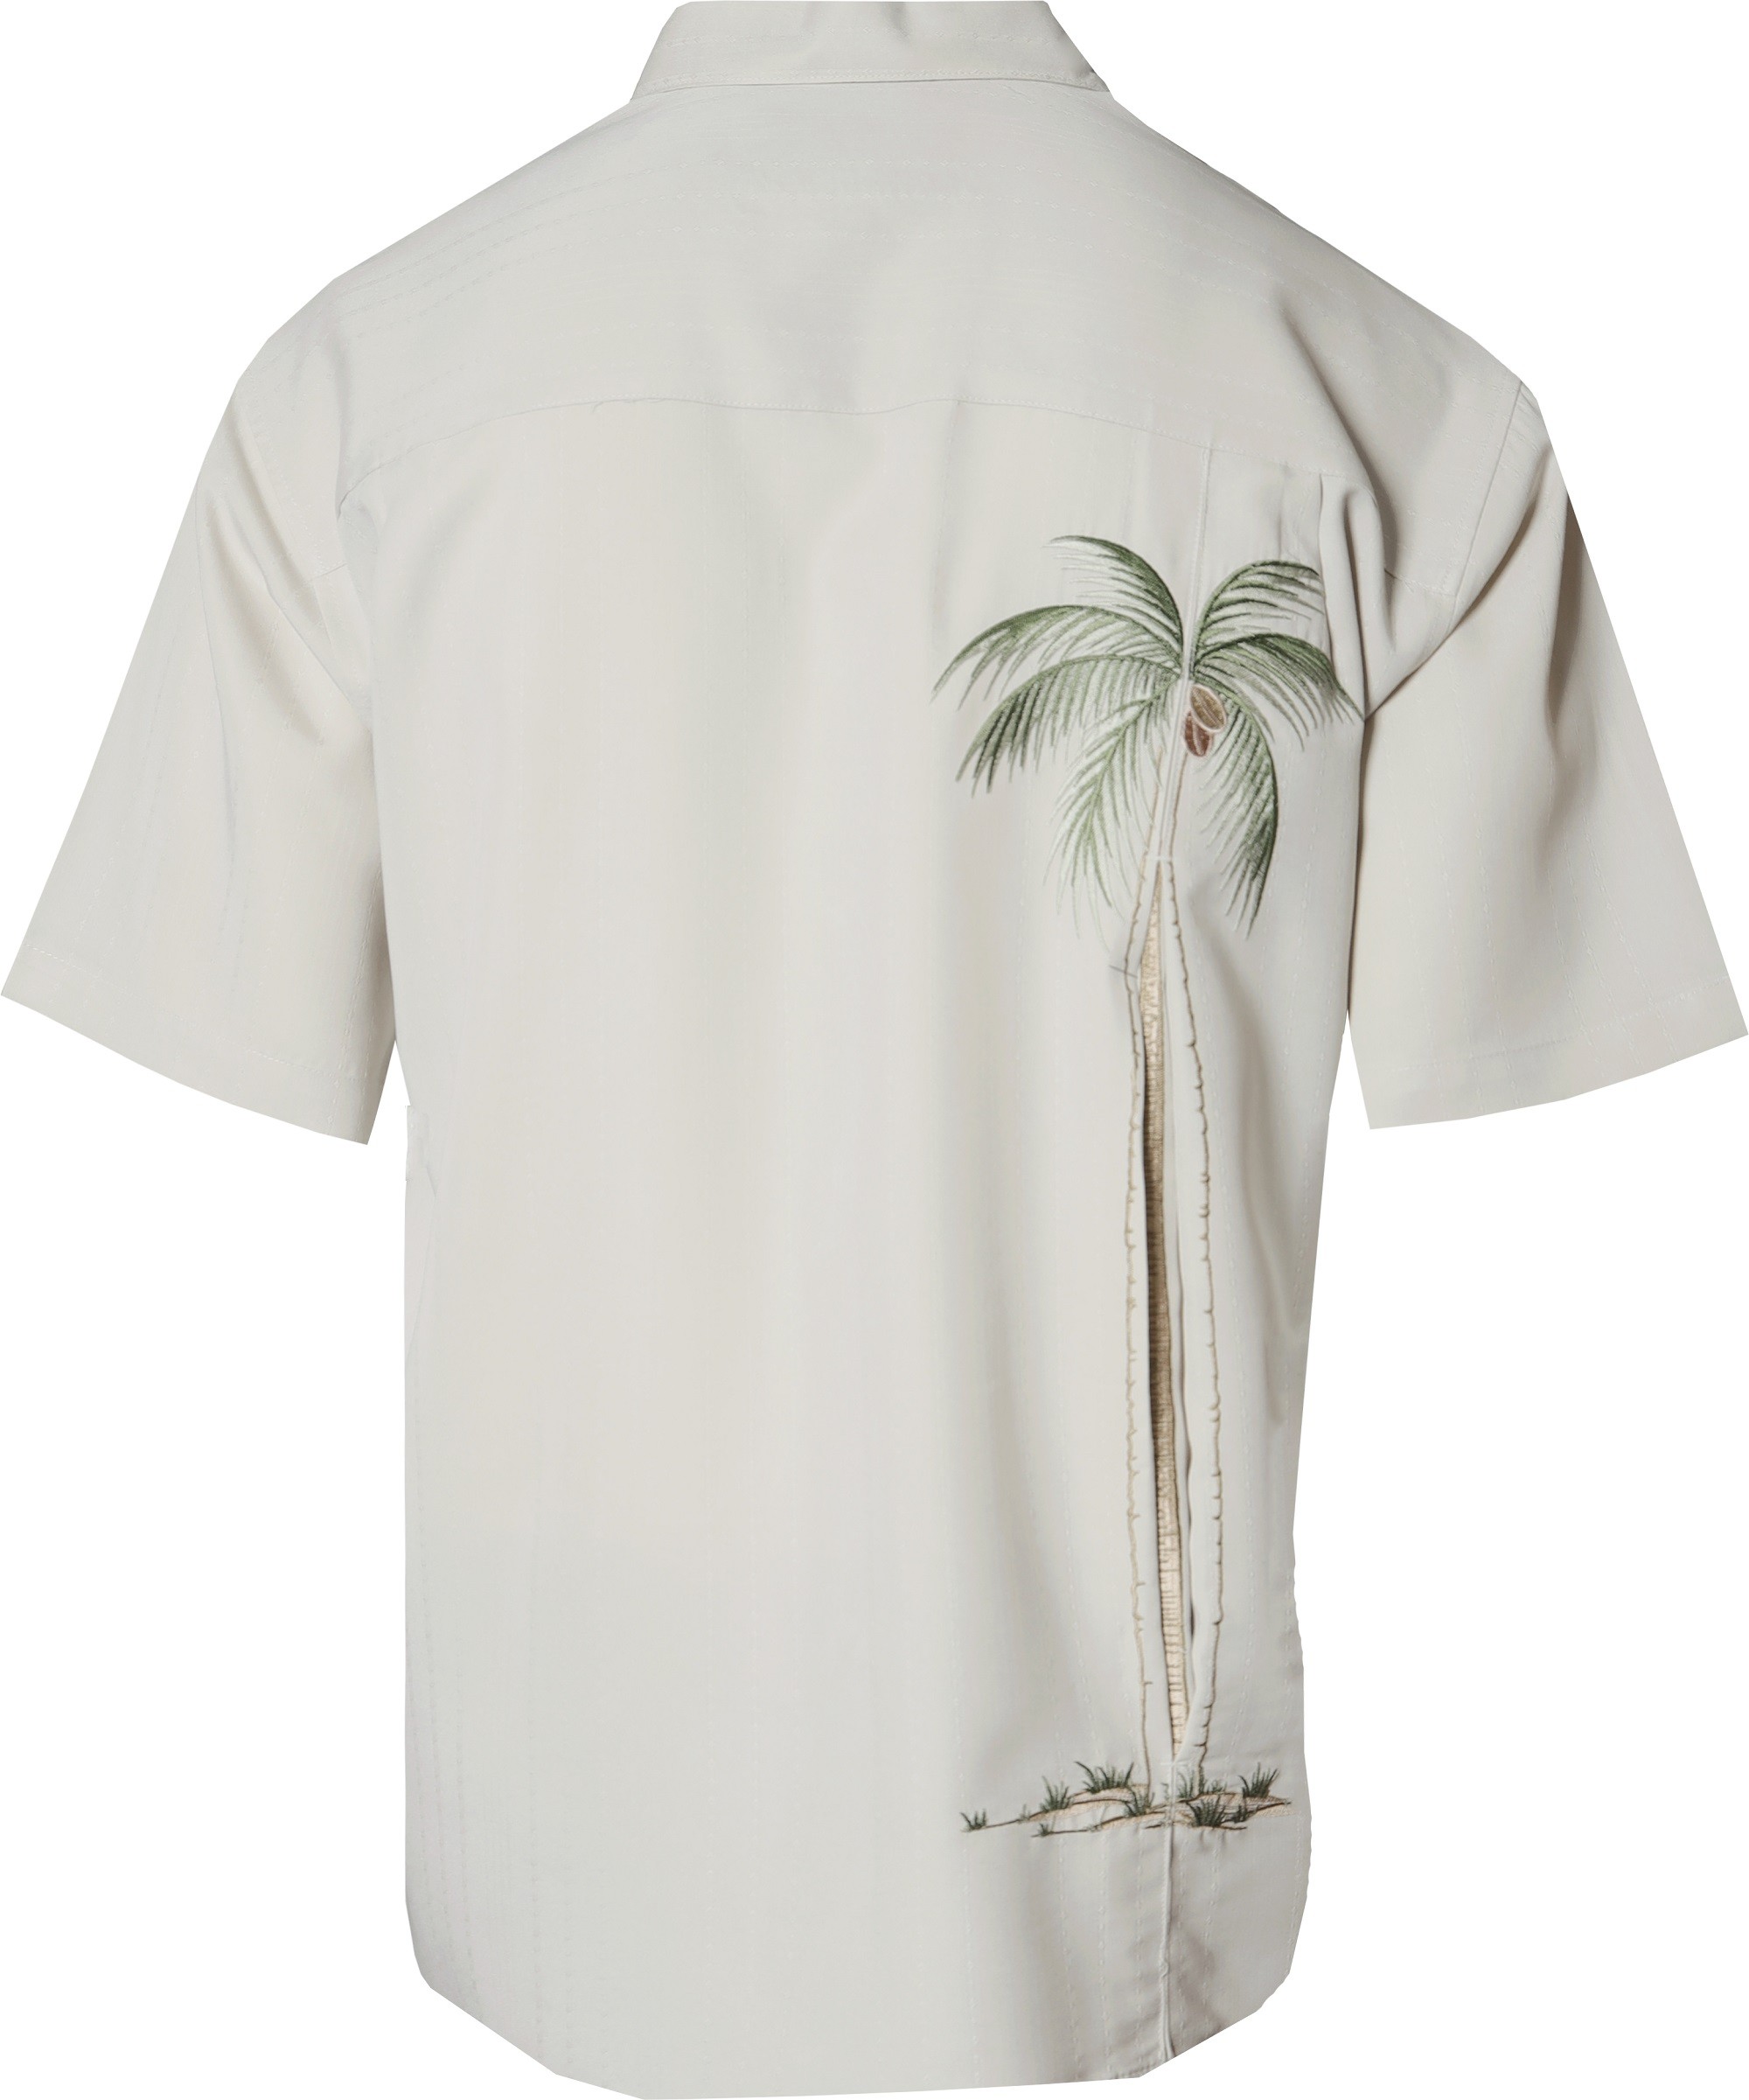 Bamboo Cay Men's Short Sleeve Ukulele Island Embroidered Button Down Shirt 